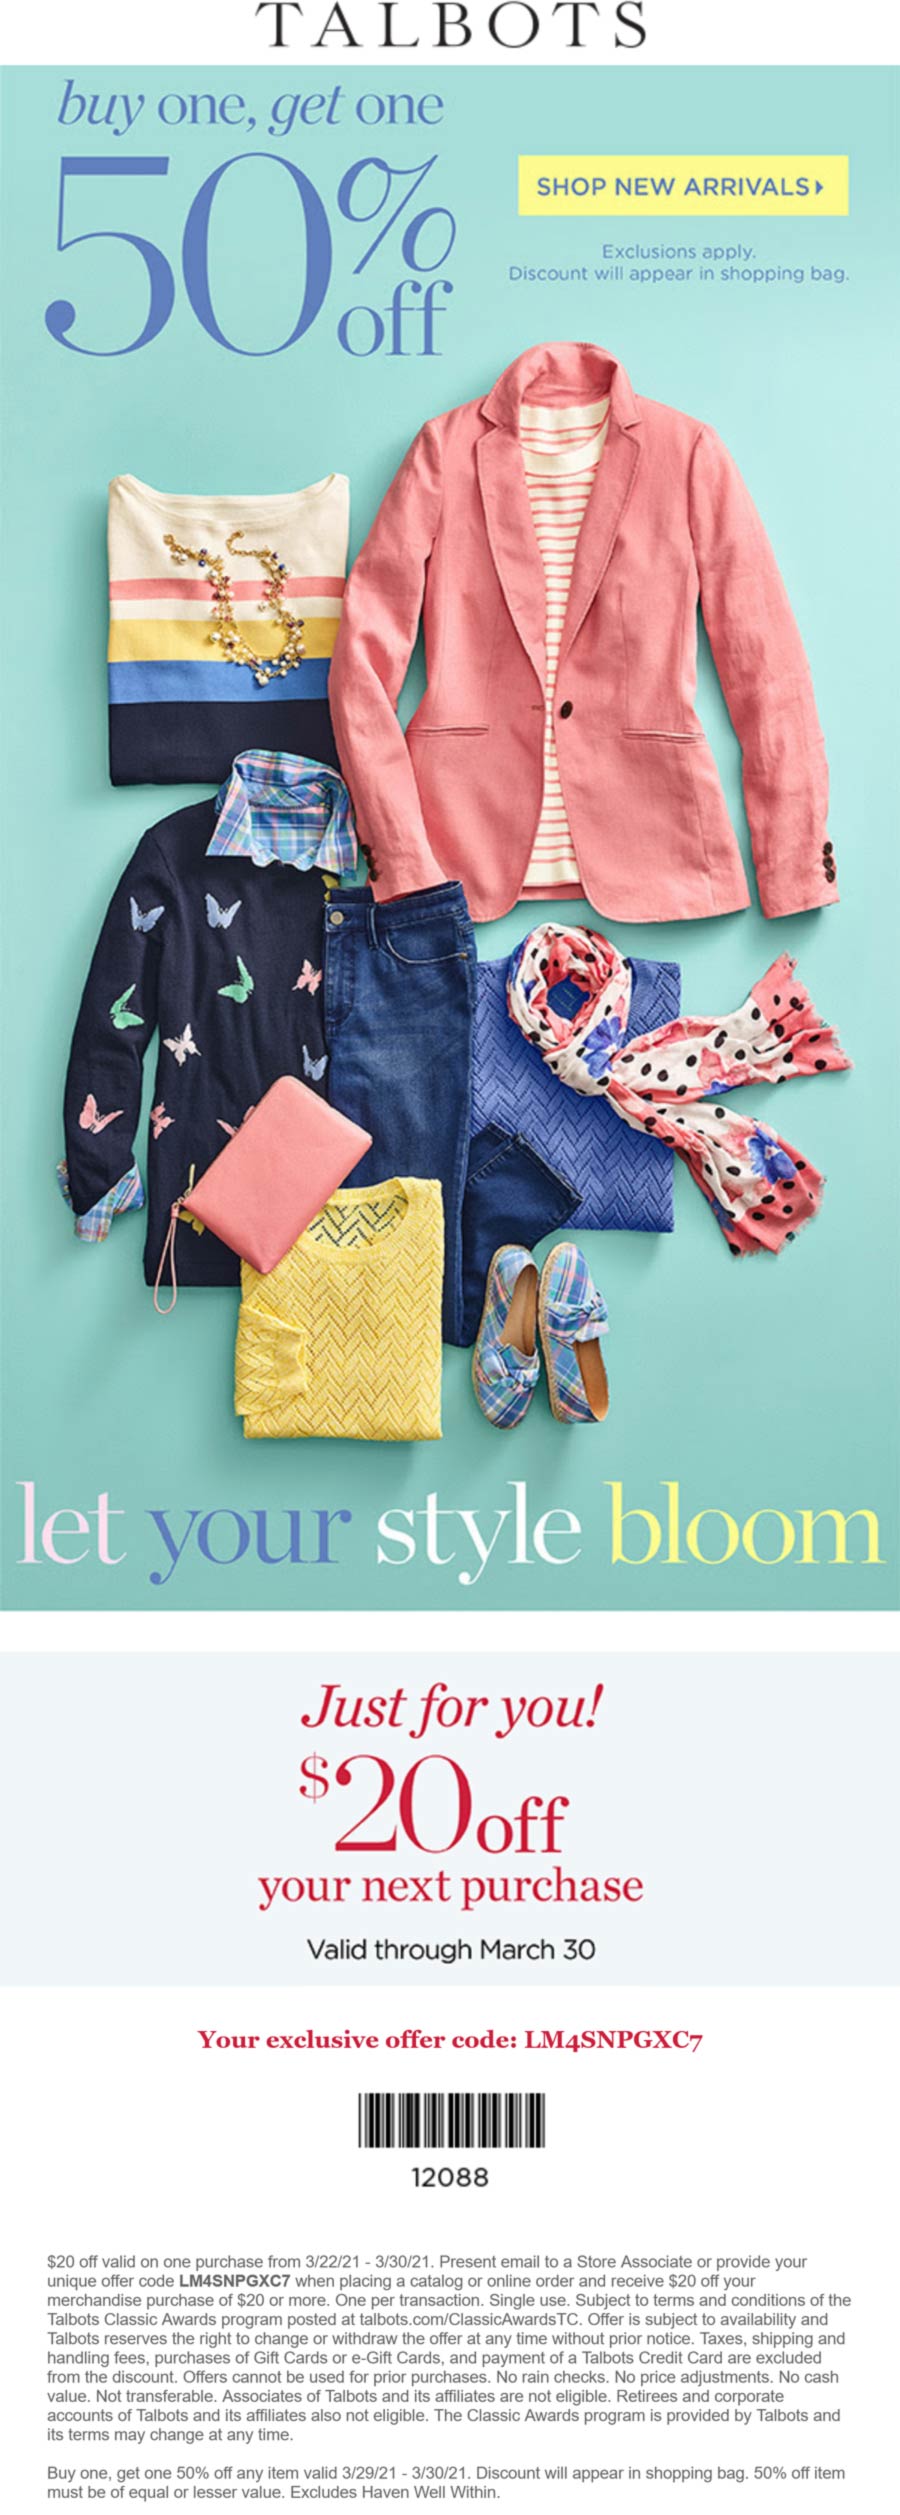 Second item 50 off at Talbots via promo code LM4SNPGXC7 talbots The